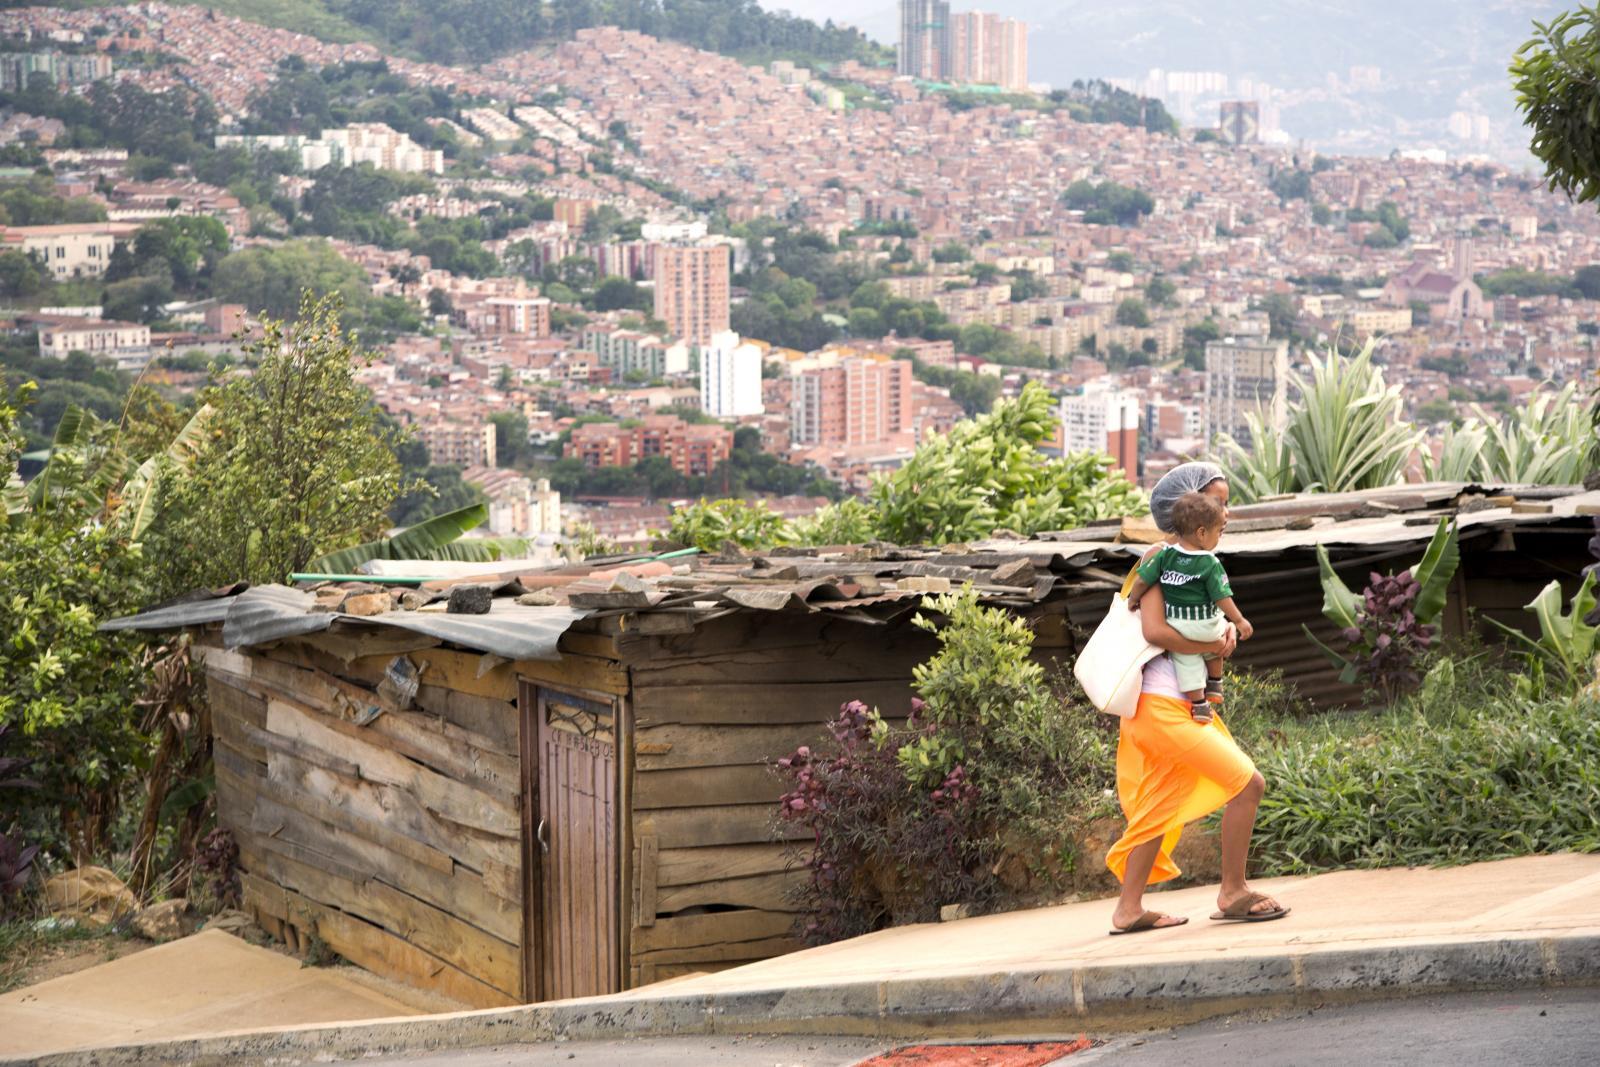 People are crowding into cities at record rates; many end up in poorer neighbourhoods with limited services and infrastructure. Electricity may be sporadic and water quality poor. Easing disparities requires specific actions to reach women, including investment in the public transport systems that many depend on. In this neighbourhood in Medellín, Colombia, most residents come from the countryside, having been displaced by conflict. Some services, like a cable car, have